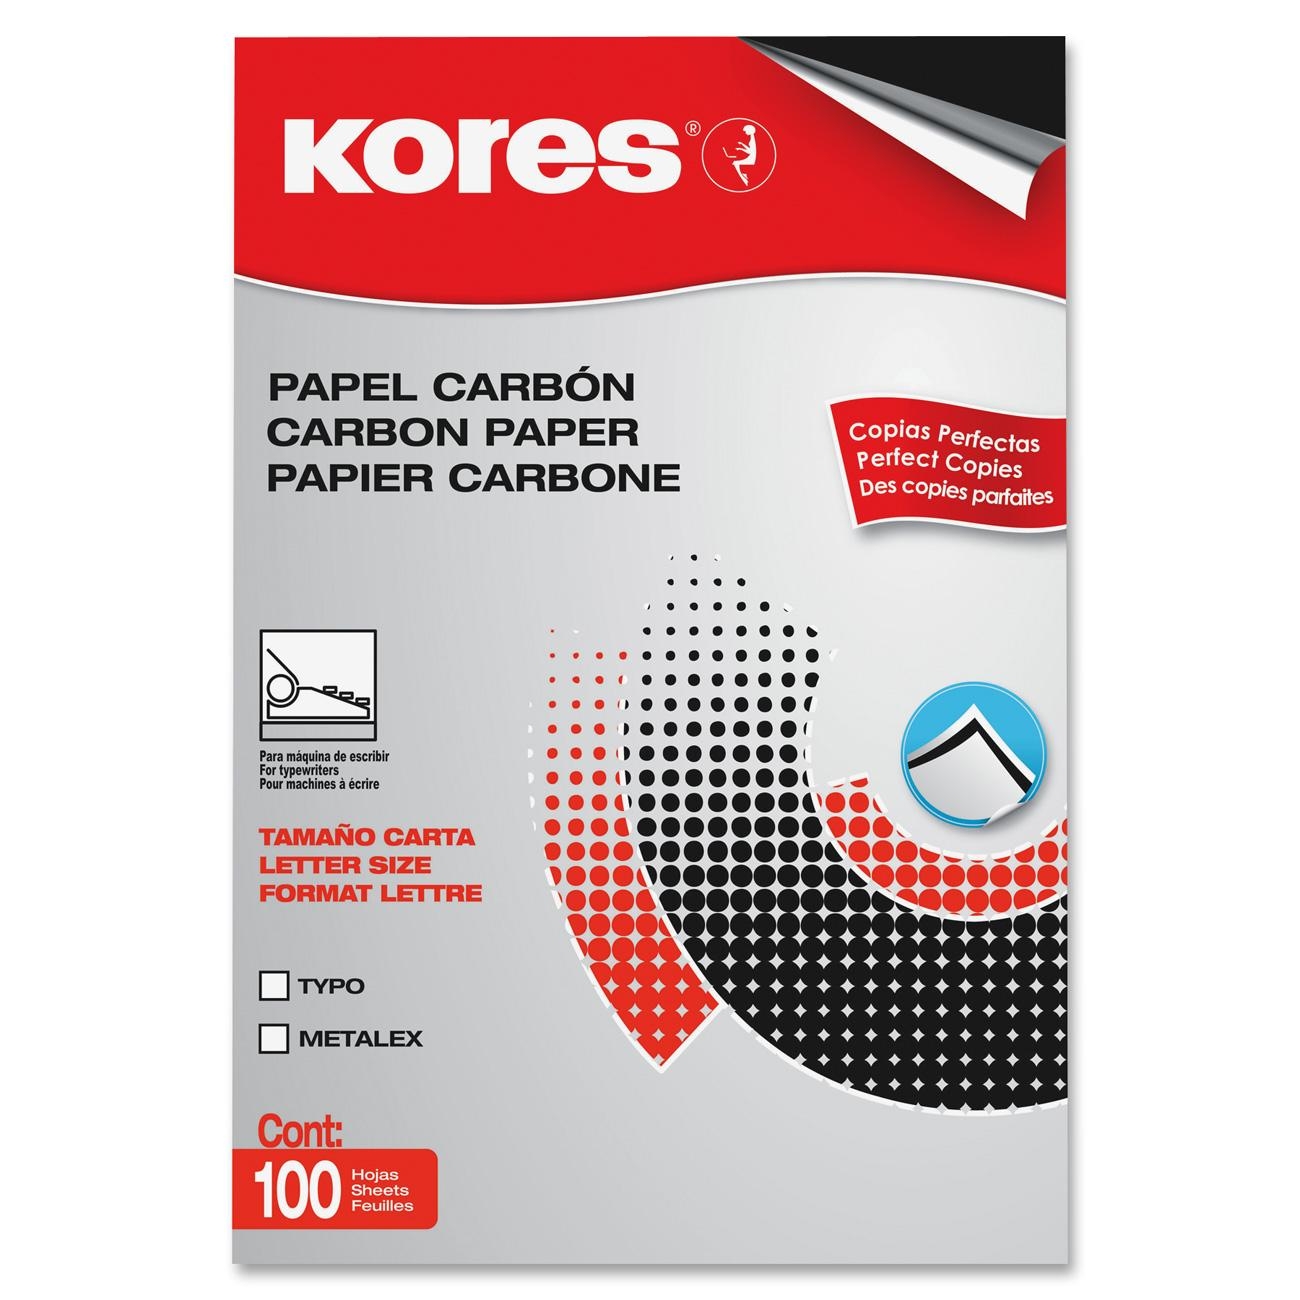 Industrias Kores Printer Papers, Speciality Papers & Pads